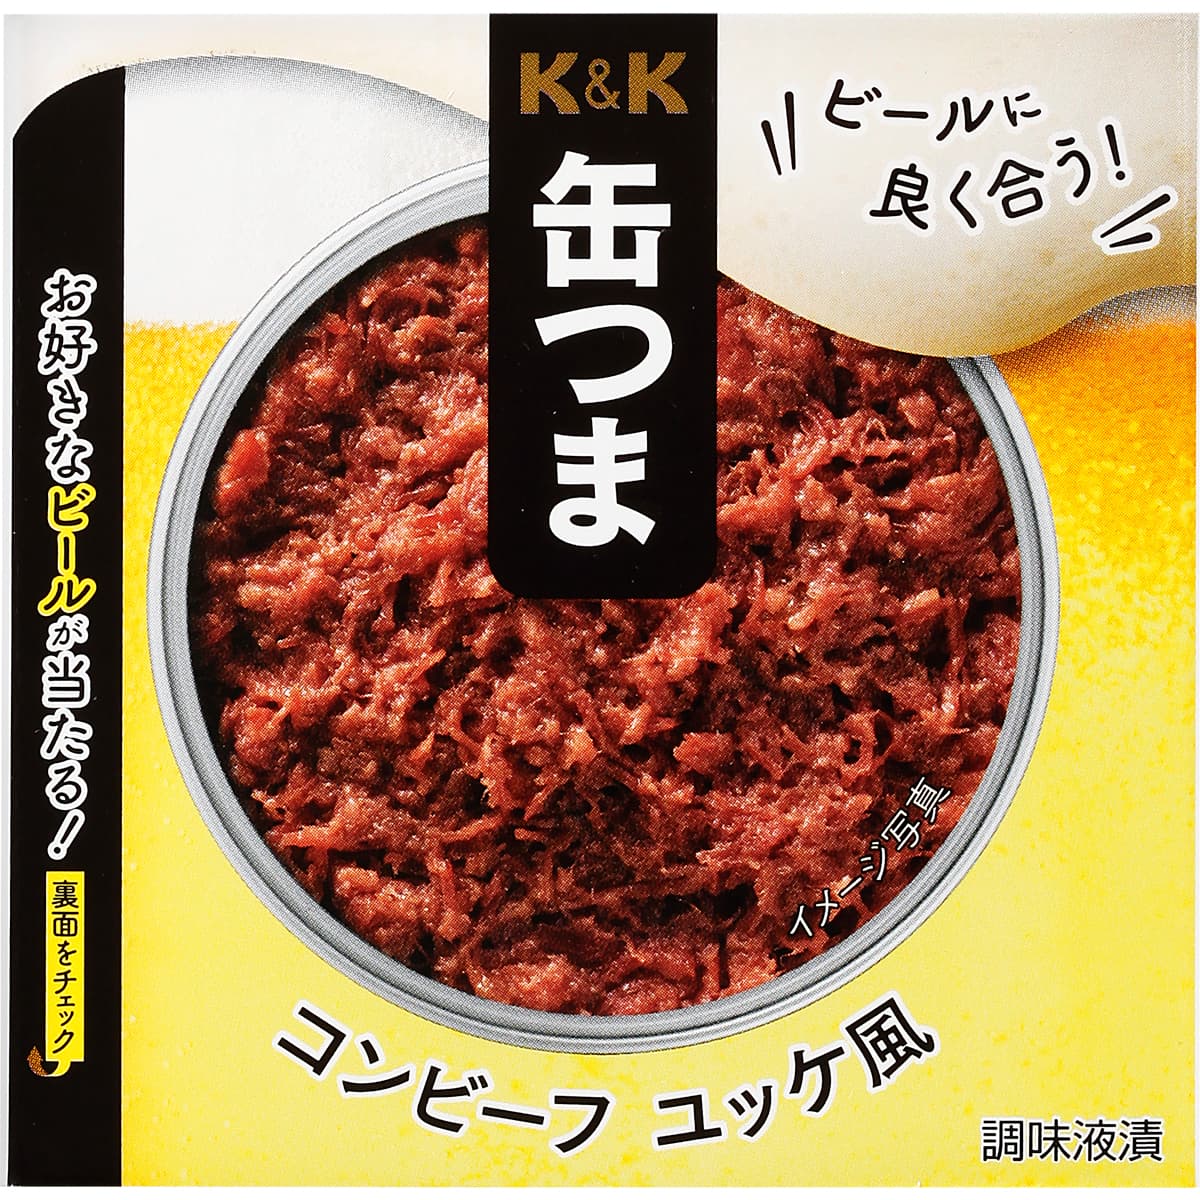 K&amp;K Canned Corned Beef Yukhoe Style (Limited Time Beer Package)